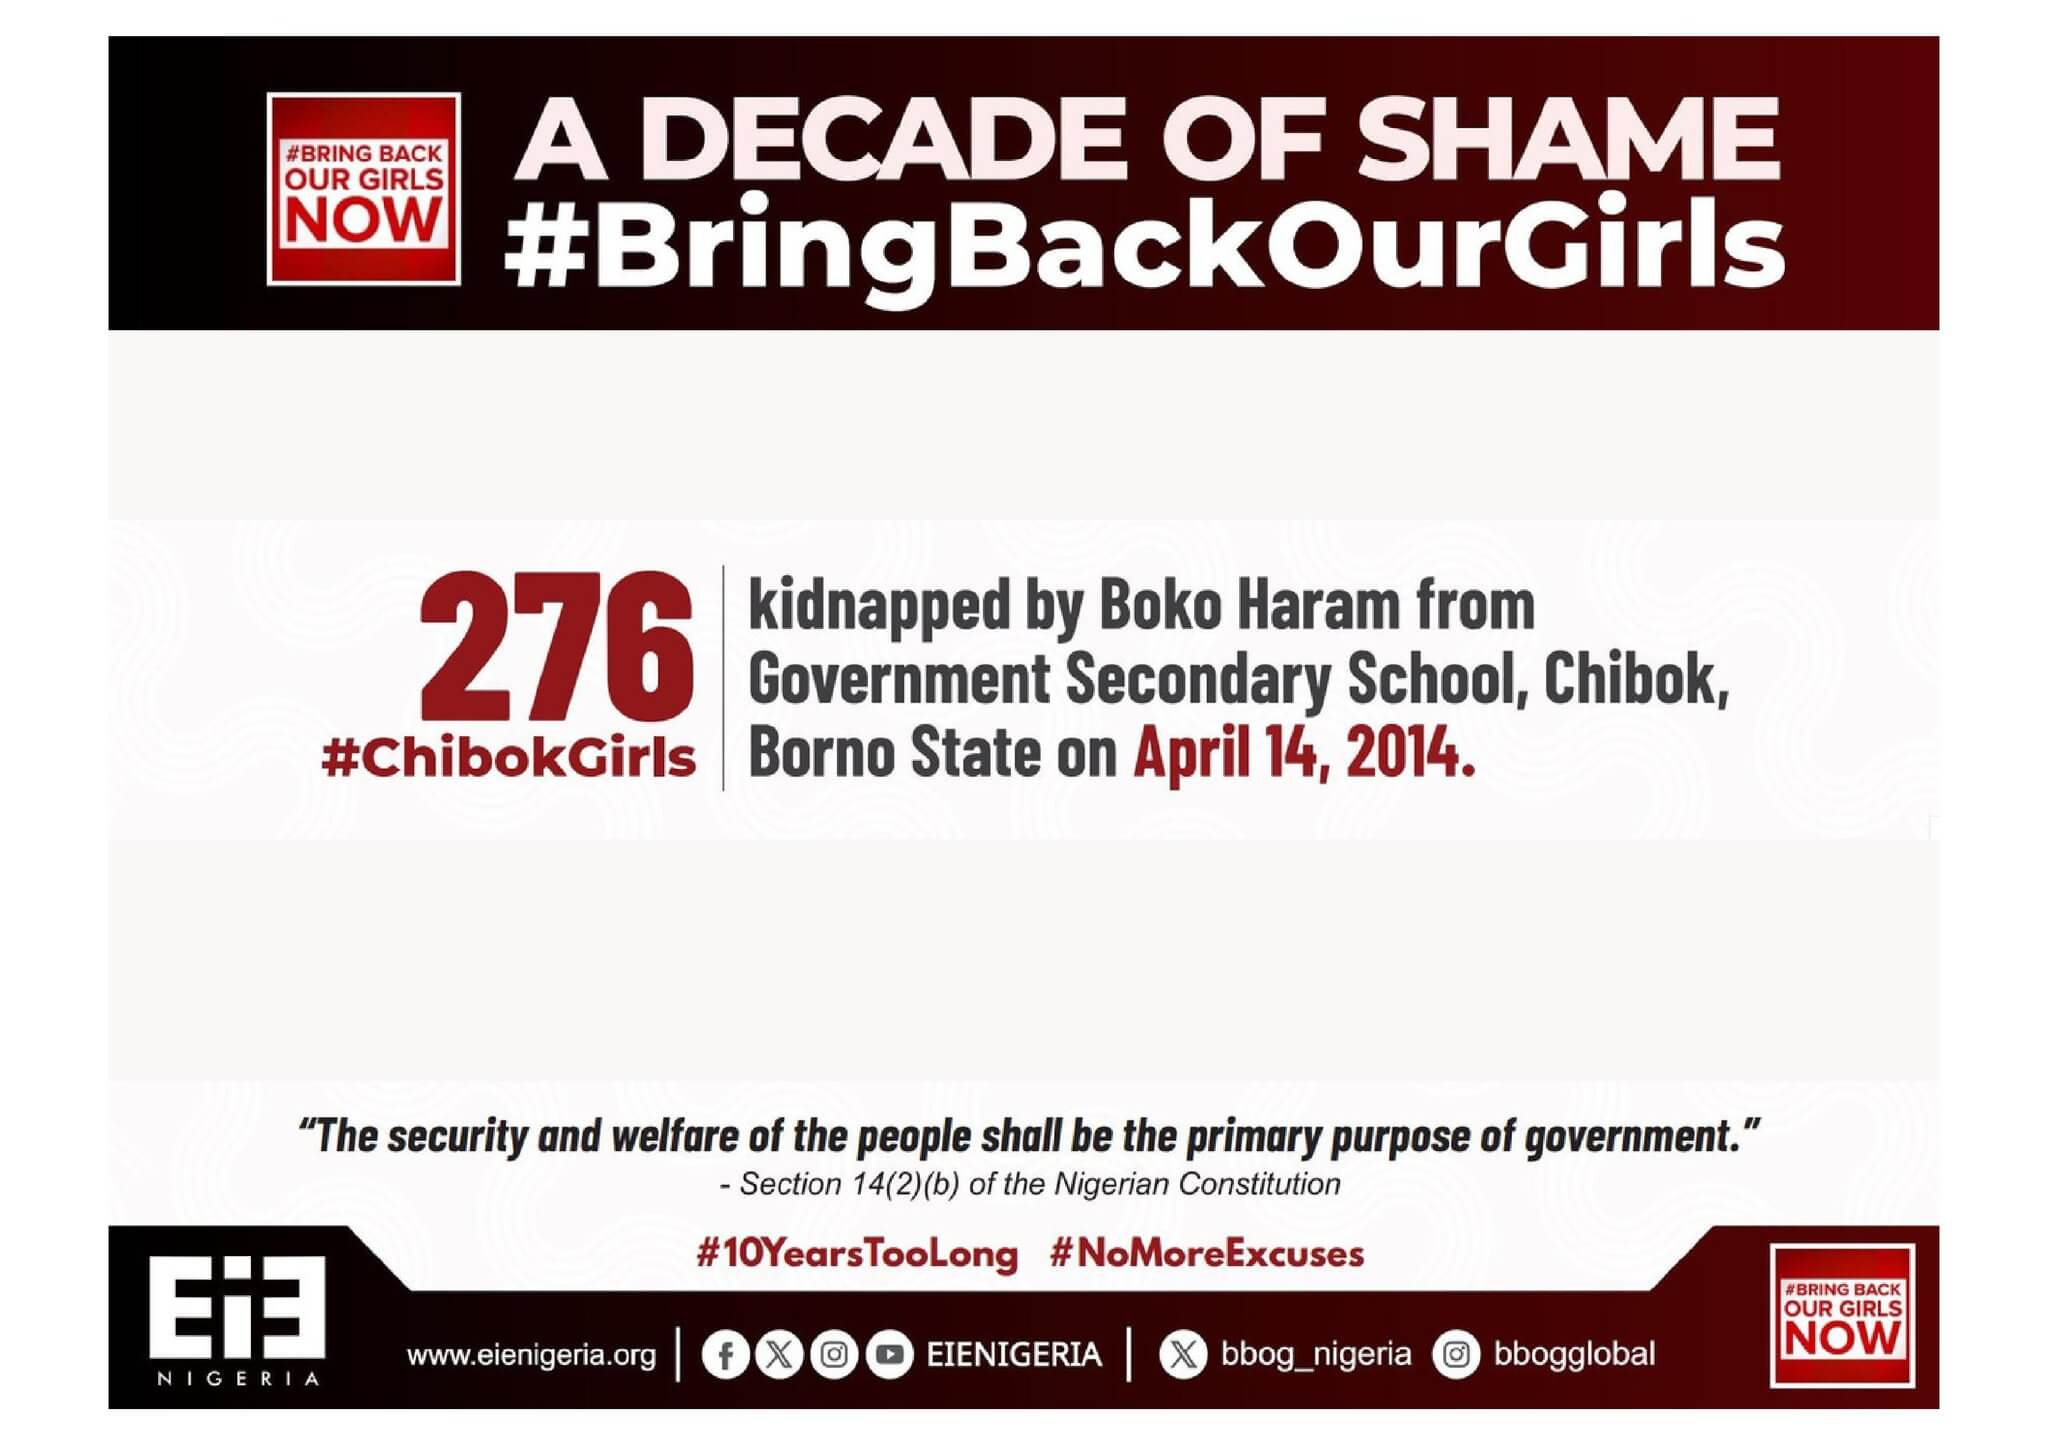 10 ans ! They did not bring back all the Chibok girls